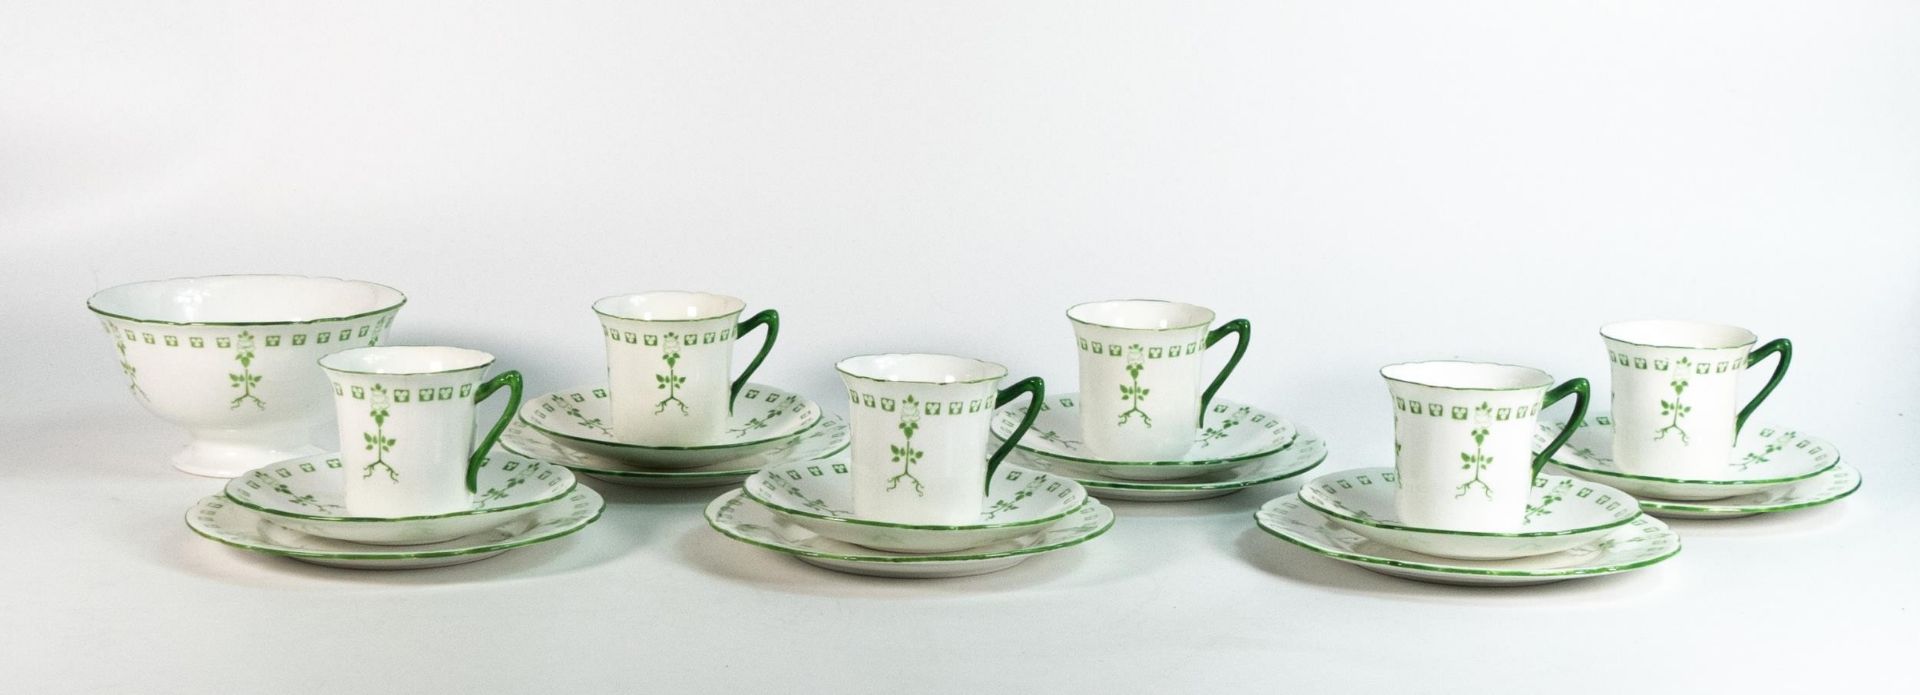 Wilman & co part tea set, Dorothy shape 10398 to include 6 cups & saucers, 6 side plates and slop